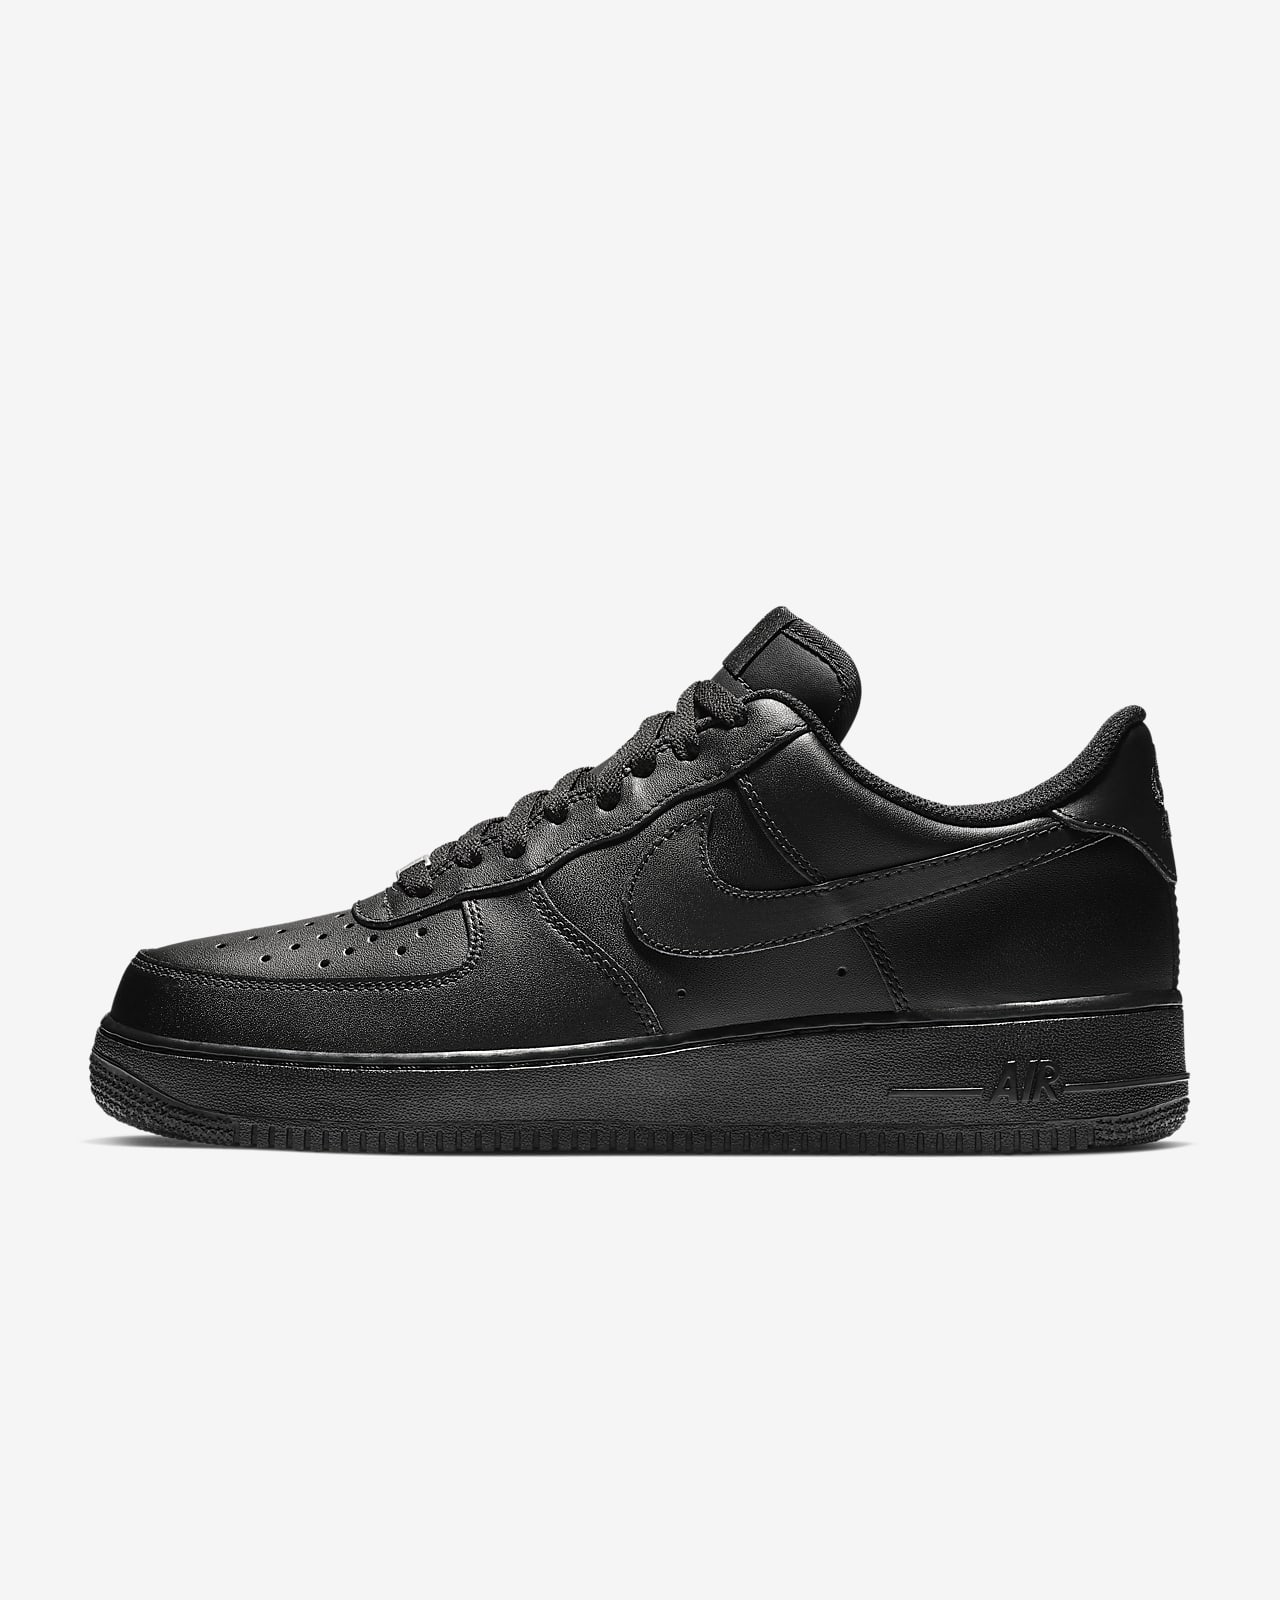 air force 1 size 8.5 mens